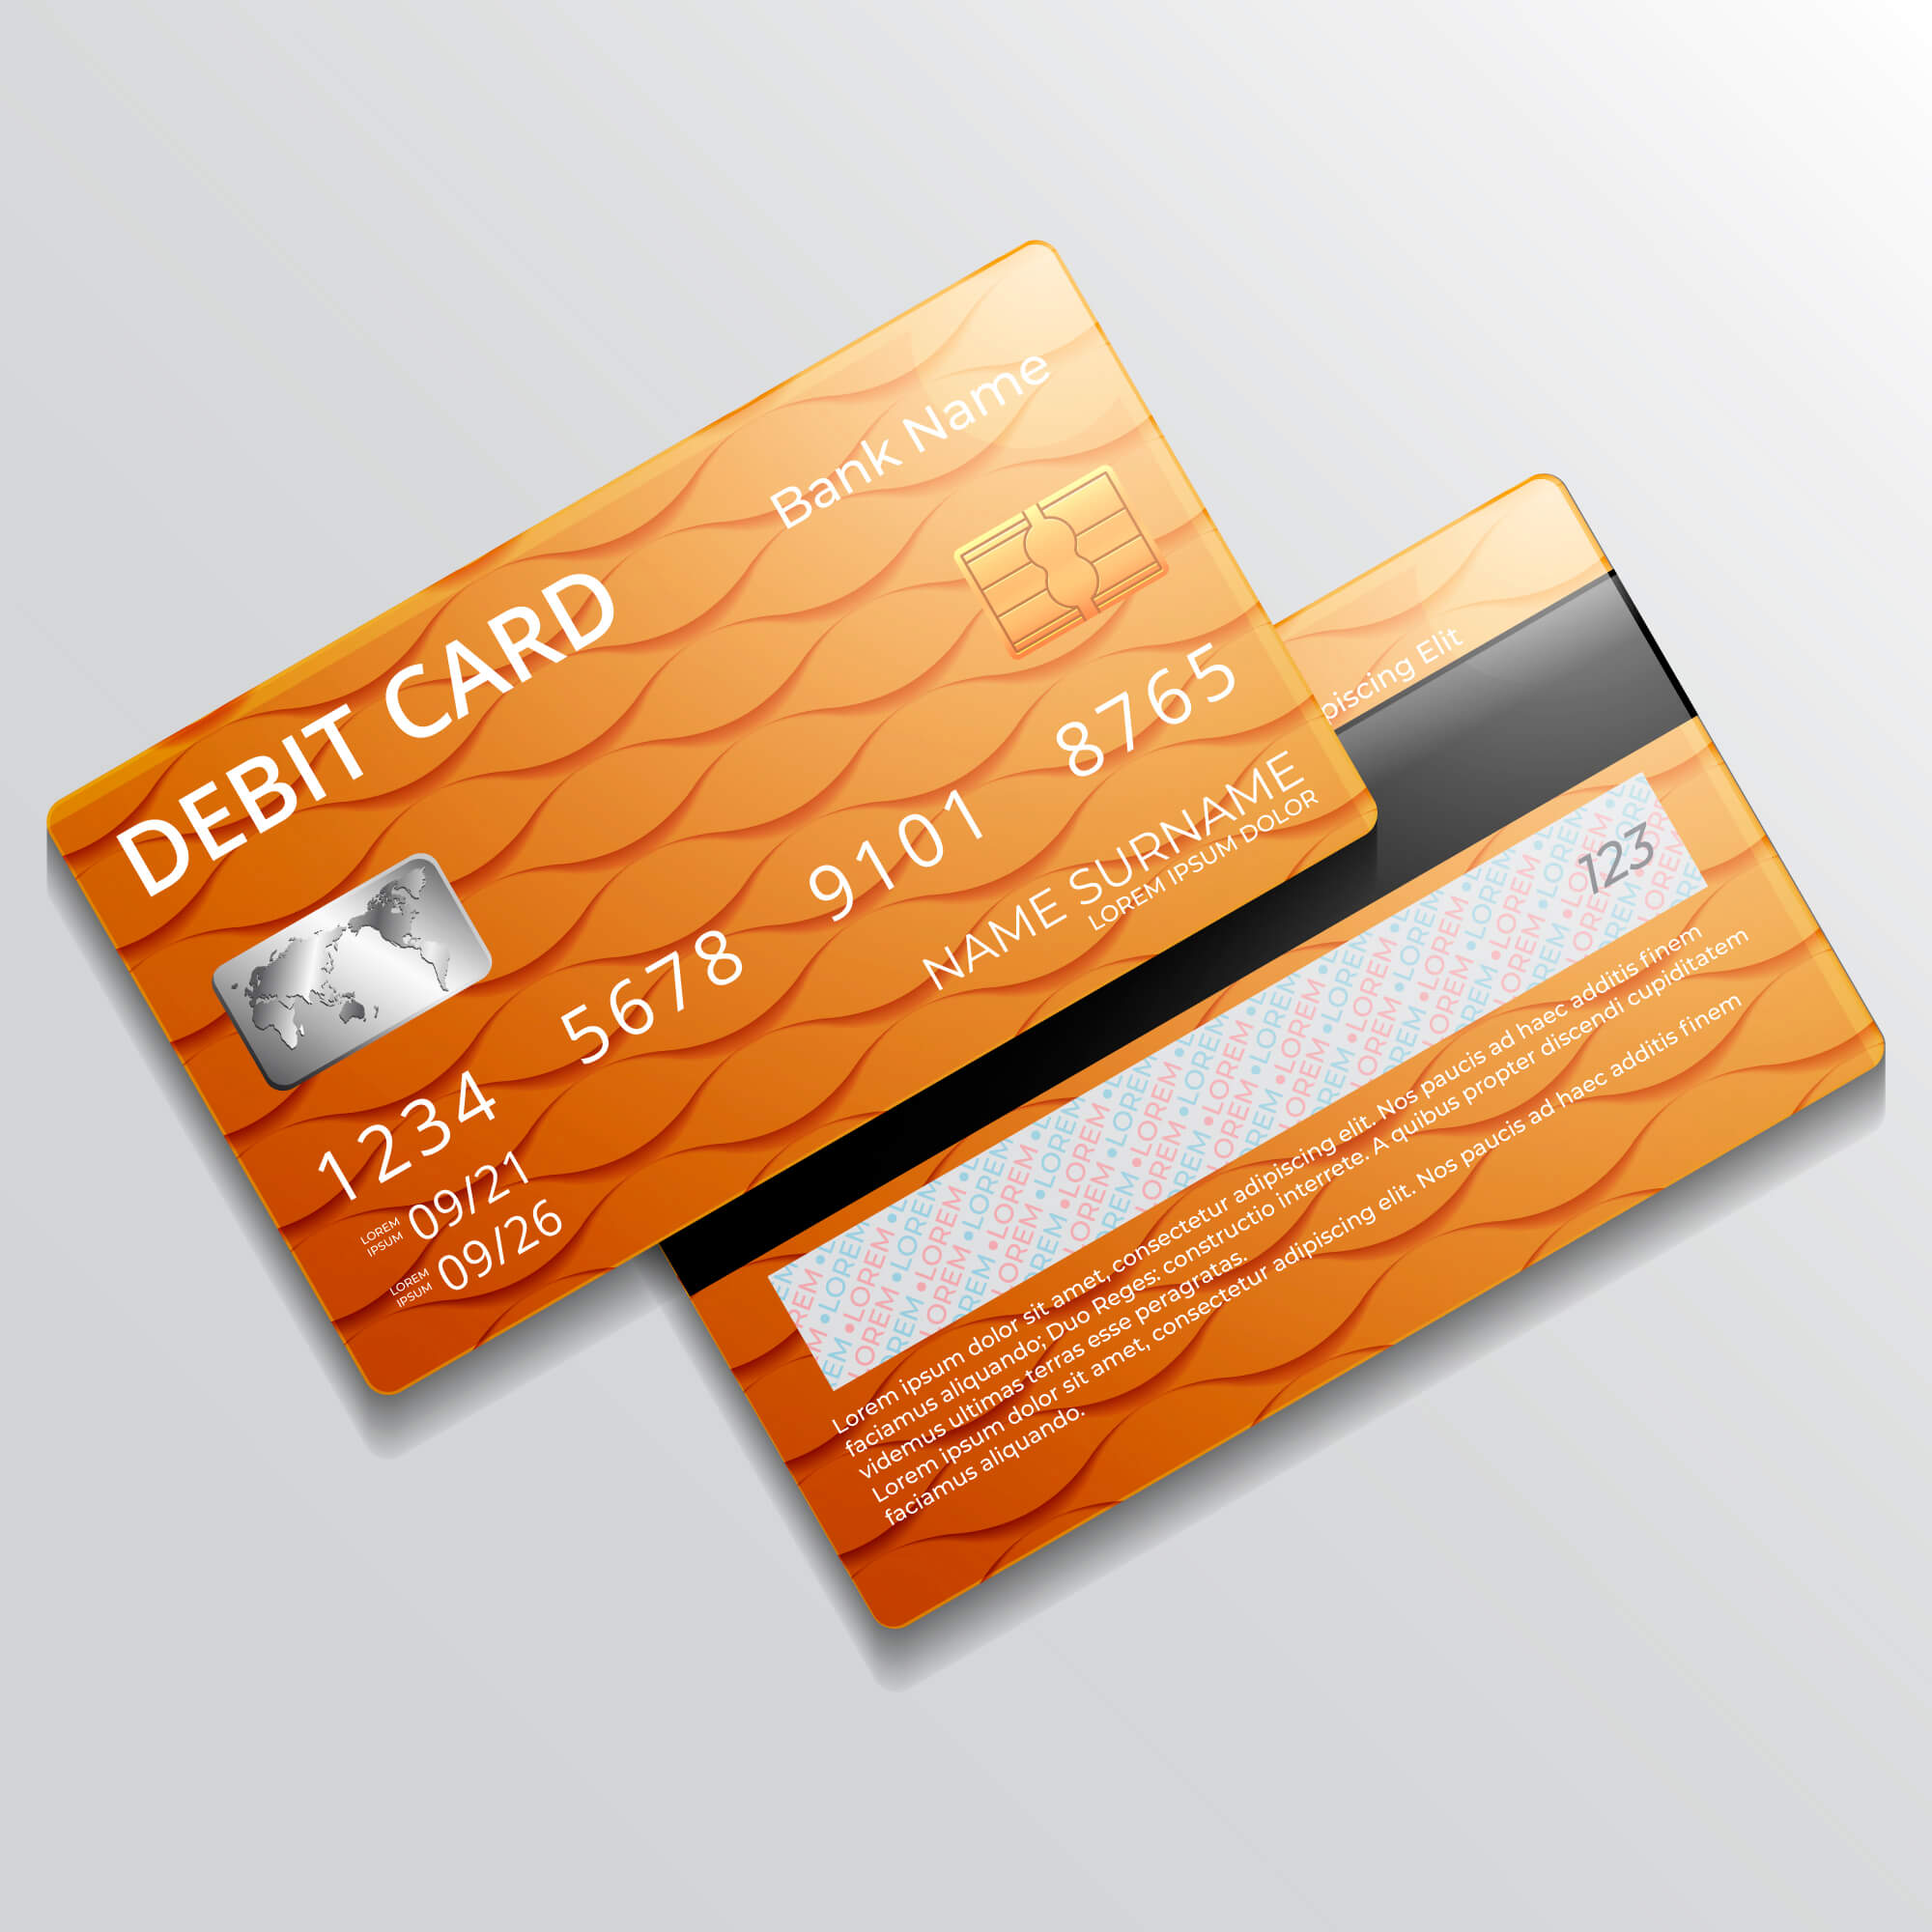 Making a Home Depot Credit Card Payment by Phone